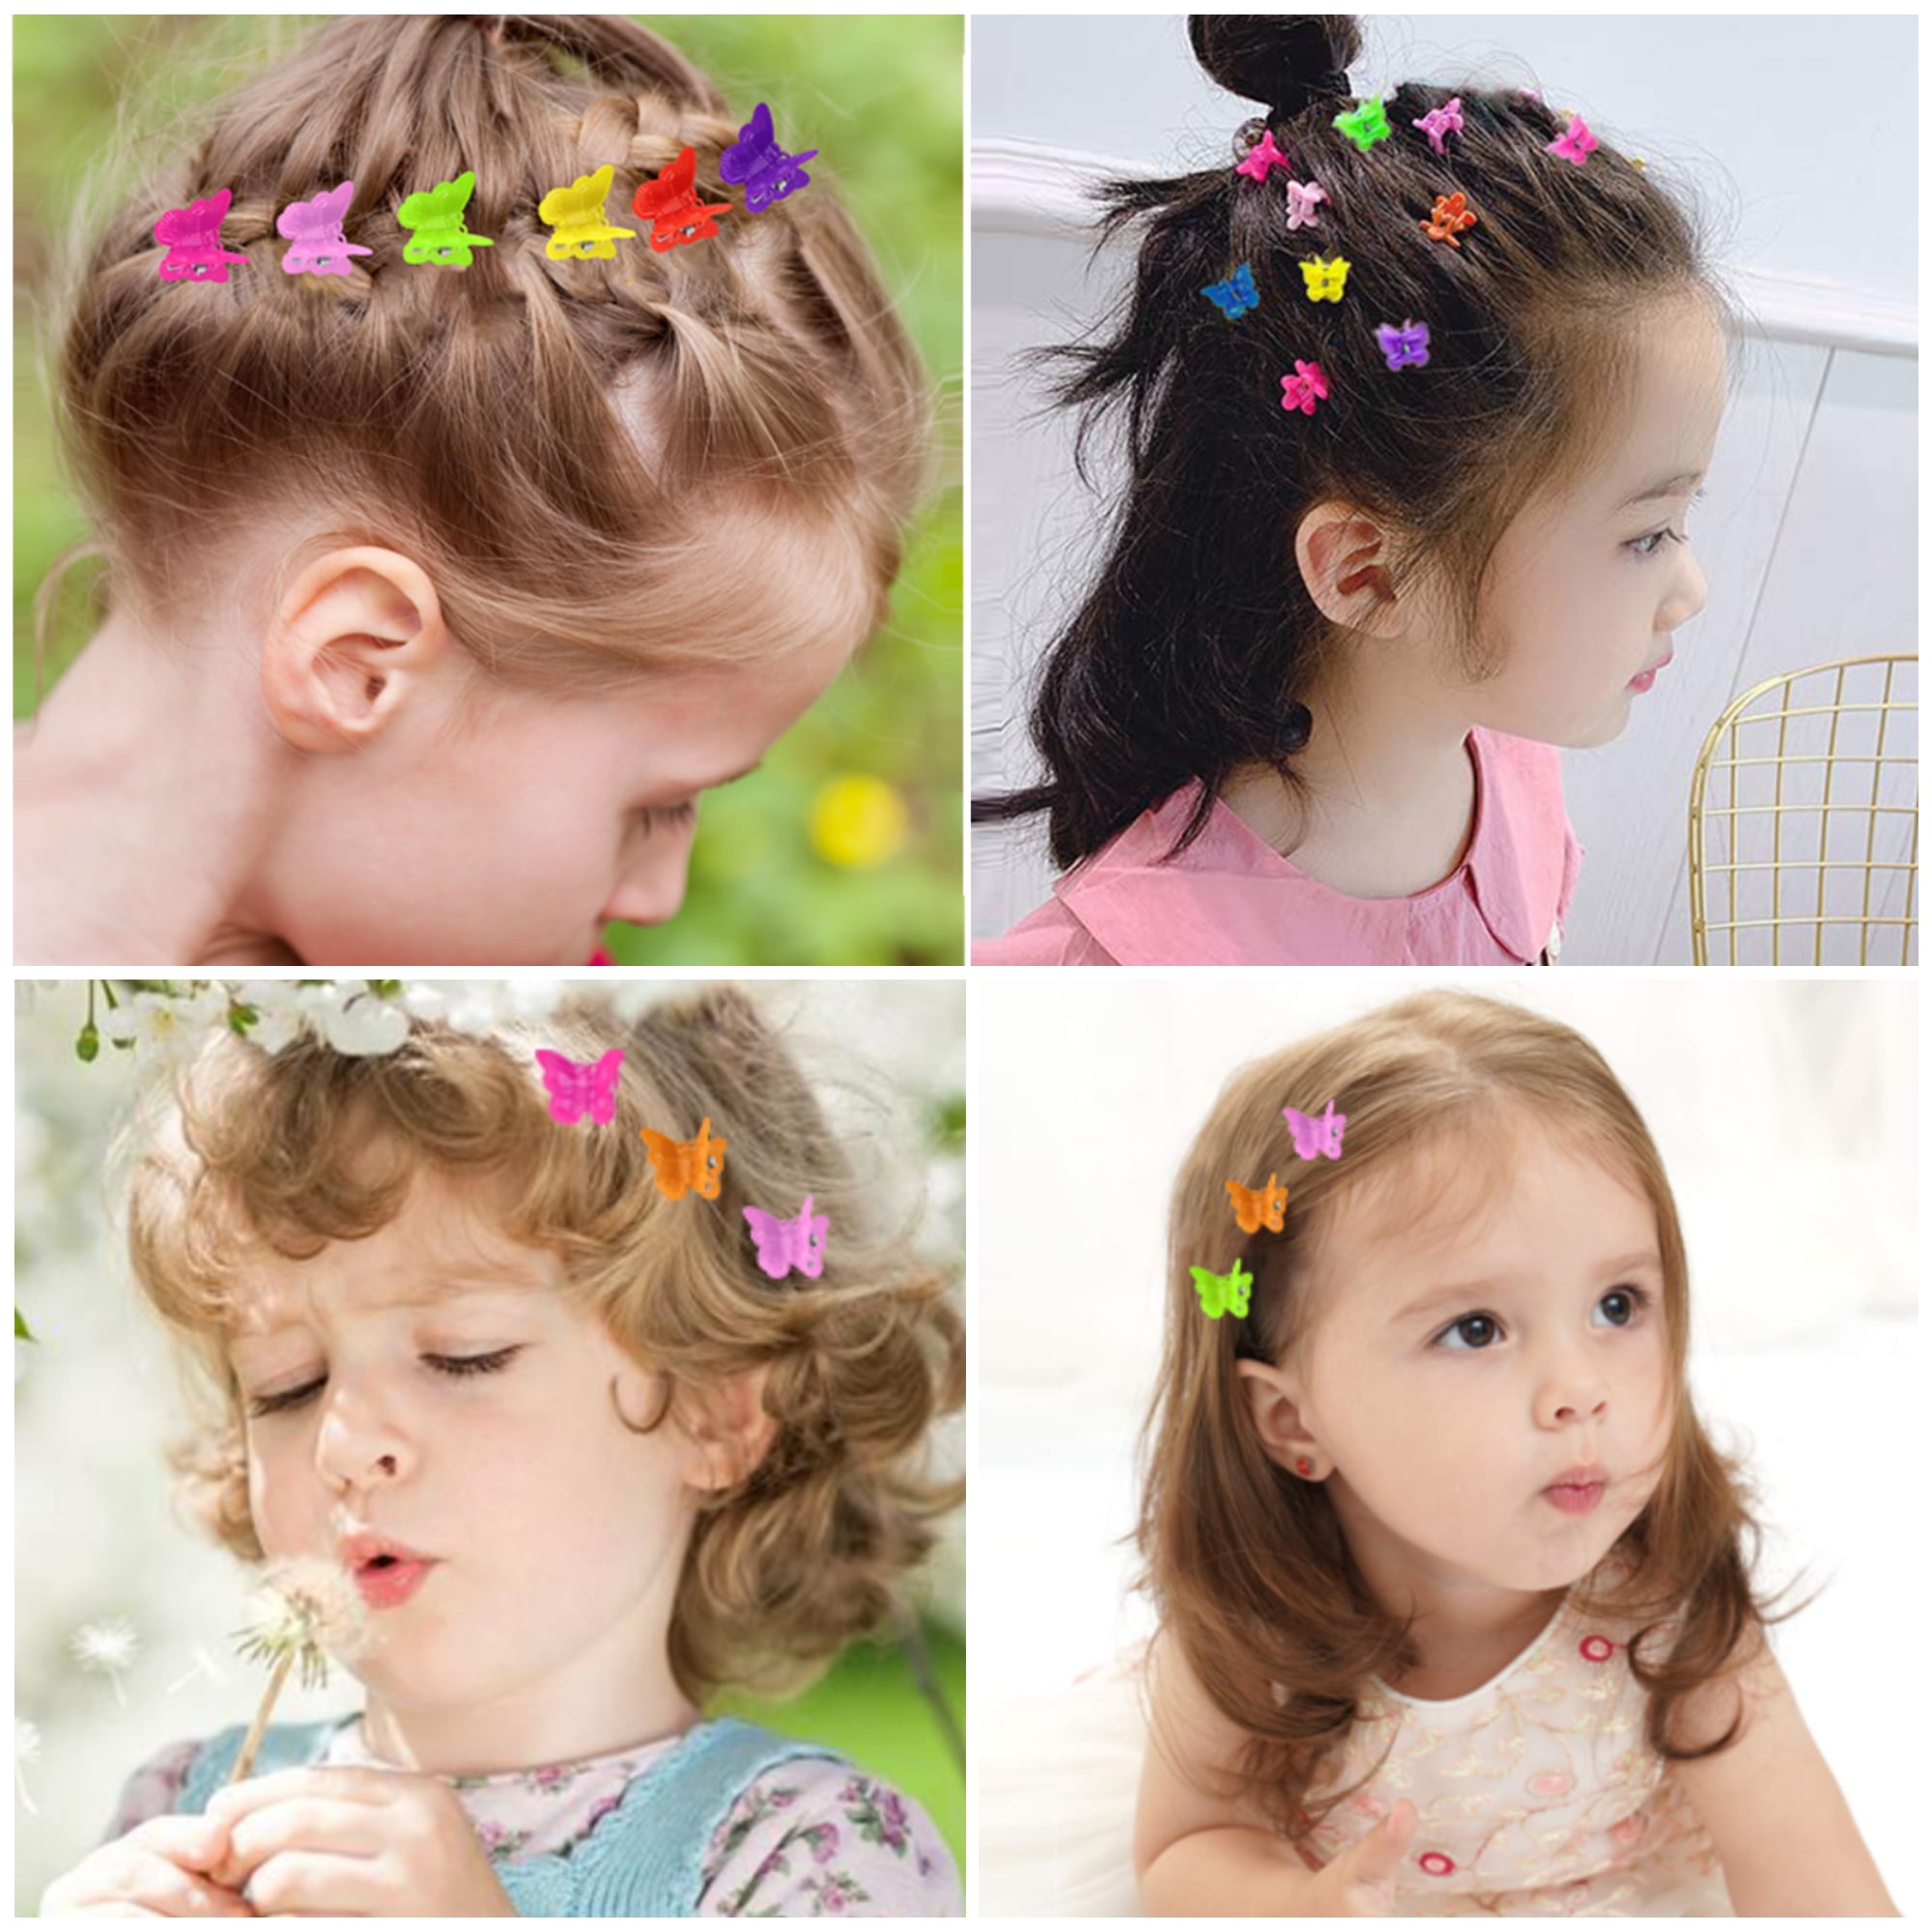 Buy MAYCREATE®10 pcs Fruit Flower Hair Pins Colorful Rainbow Hair Clips  Kawaii Hair Accessories for Girls Kids baby Online at Low Prices in India -  Amazon.in